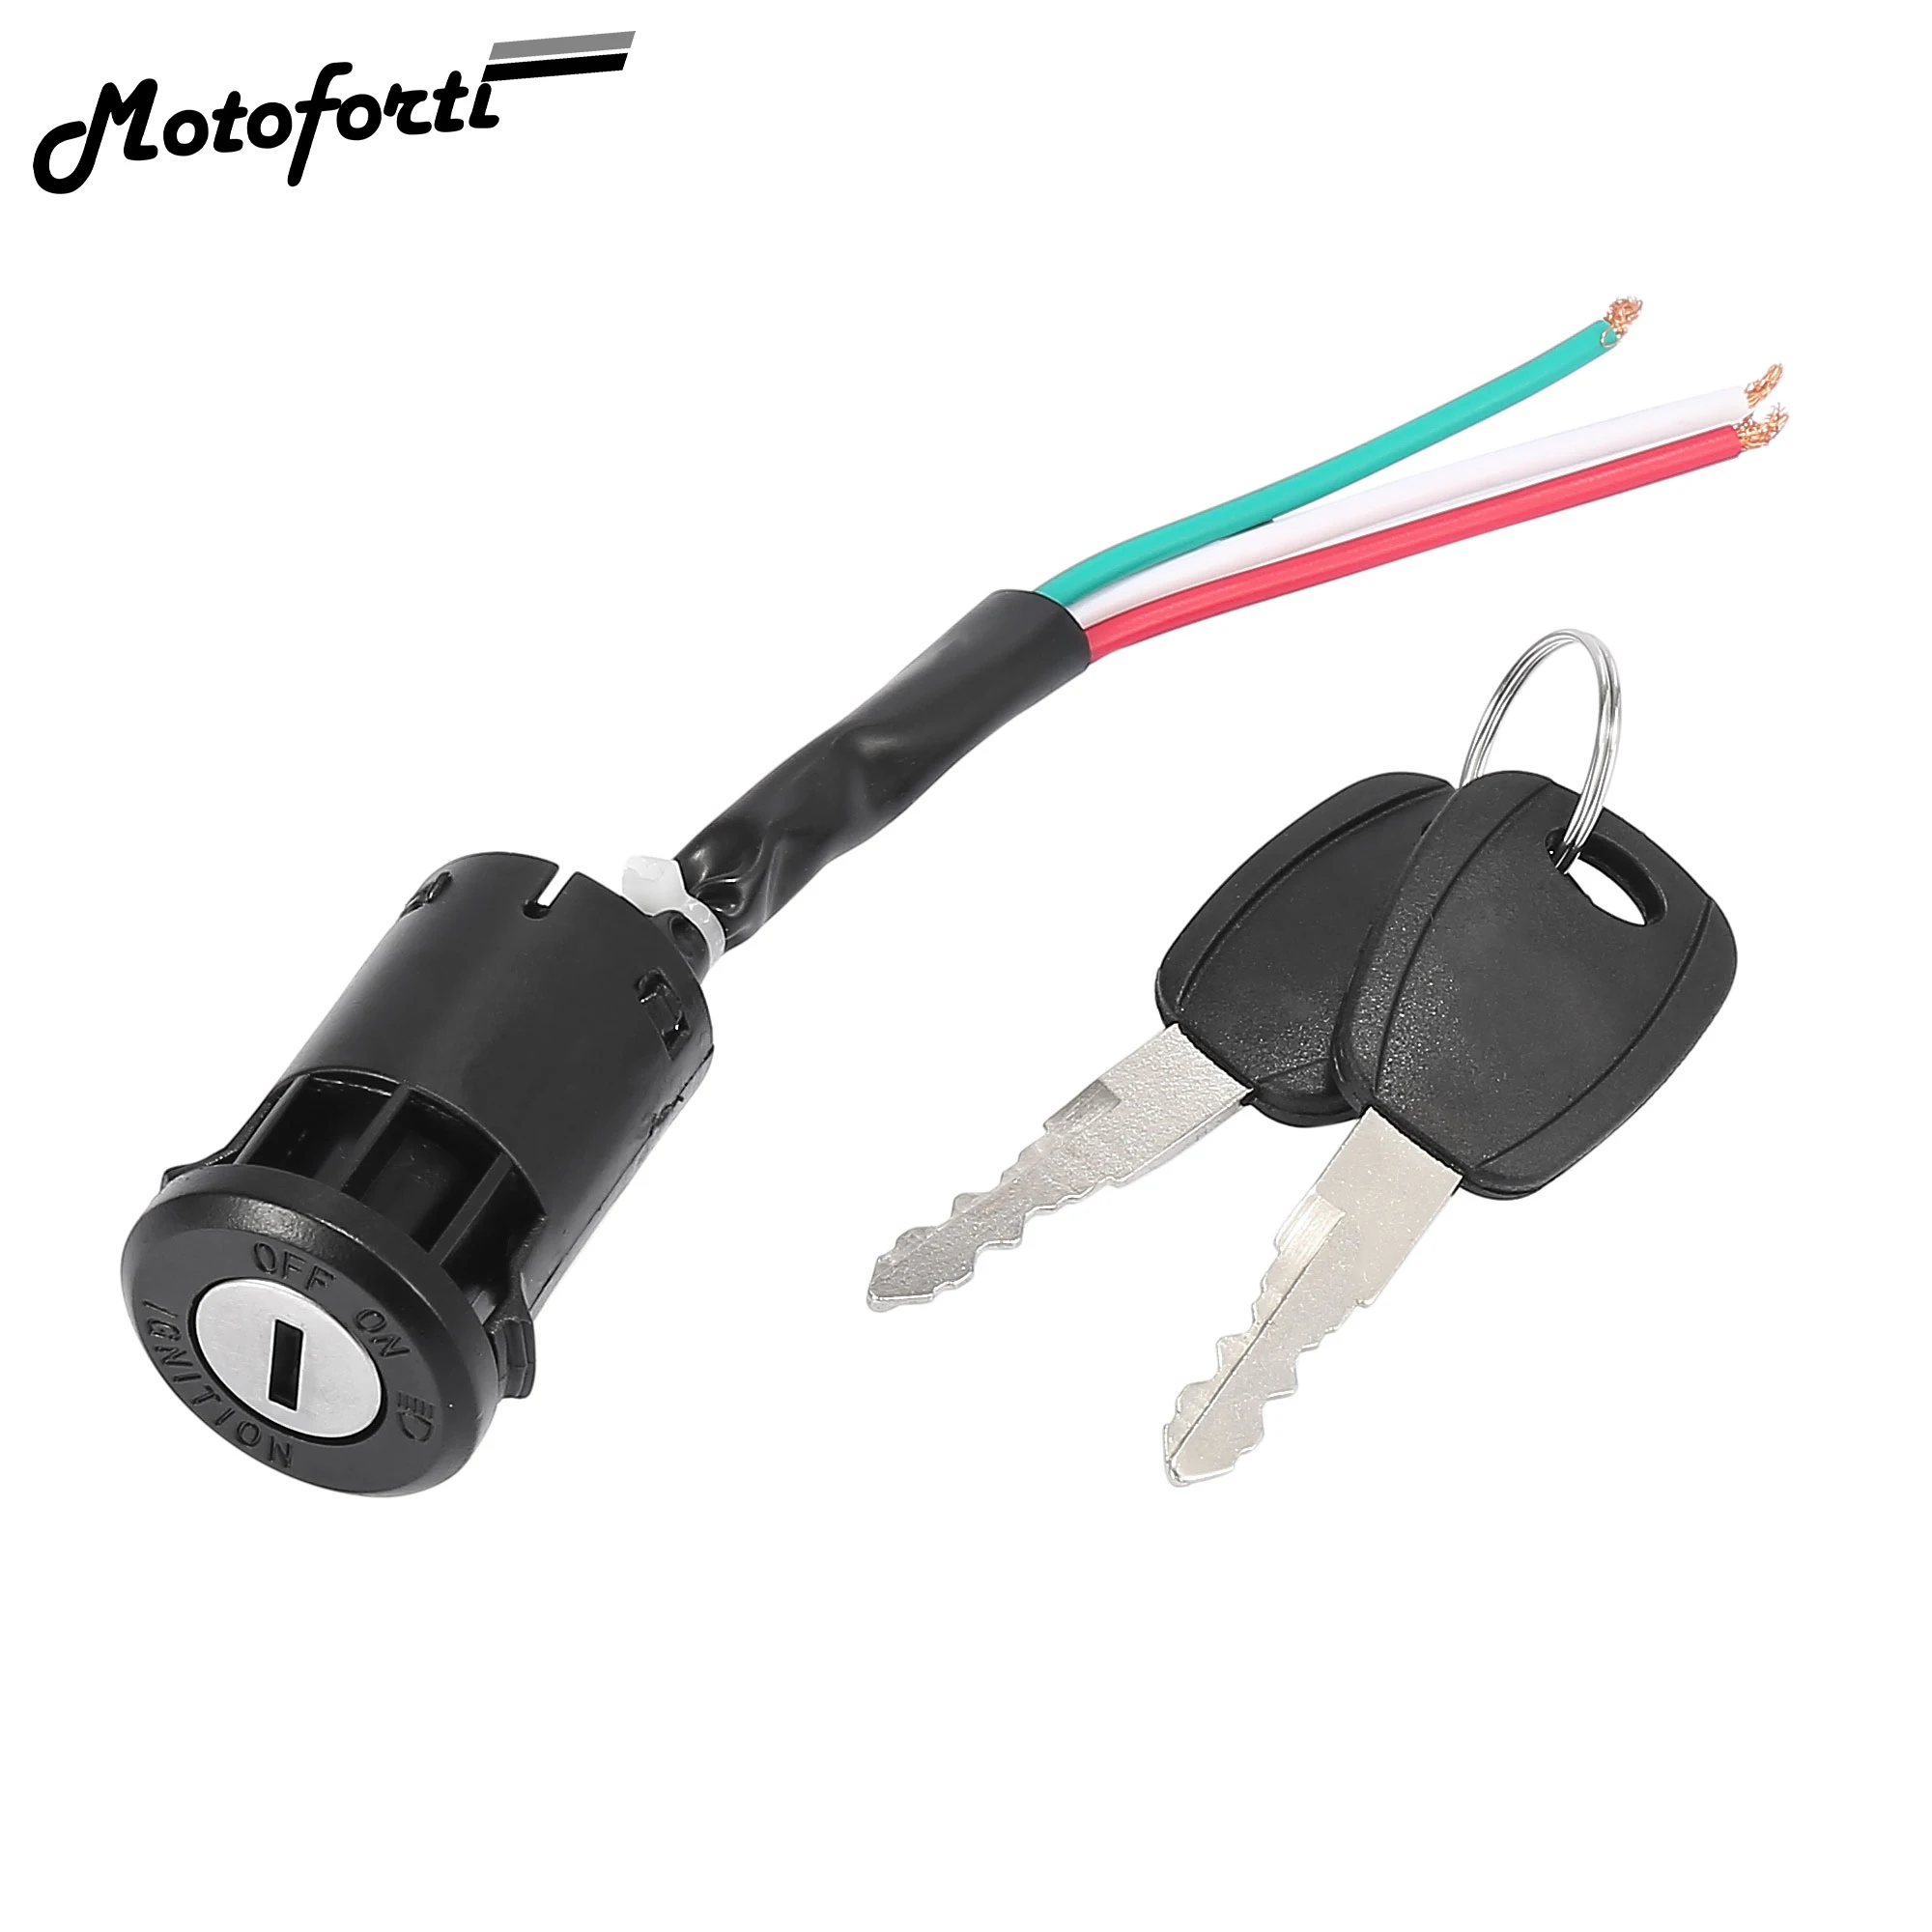 

Motoforti 3 Wires Motorcycles Motorbike Scooter Go Kart ATV Electric Bikes Ignition Switch Lock With Keys Accessories